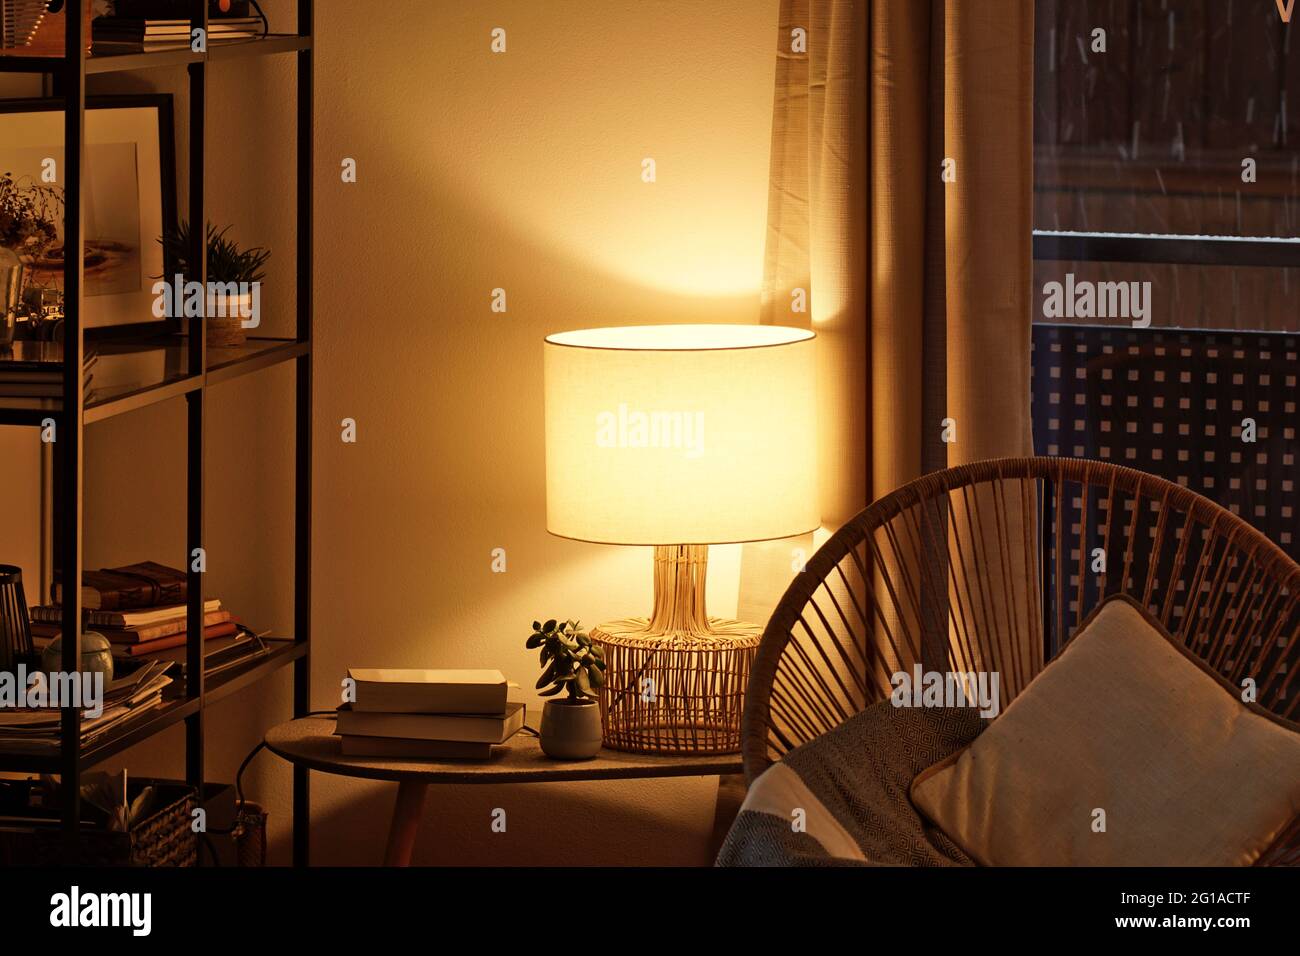 View of a cozy reader's corner with a table lamp spending warm light Stock Photo